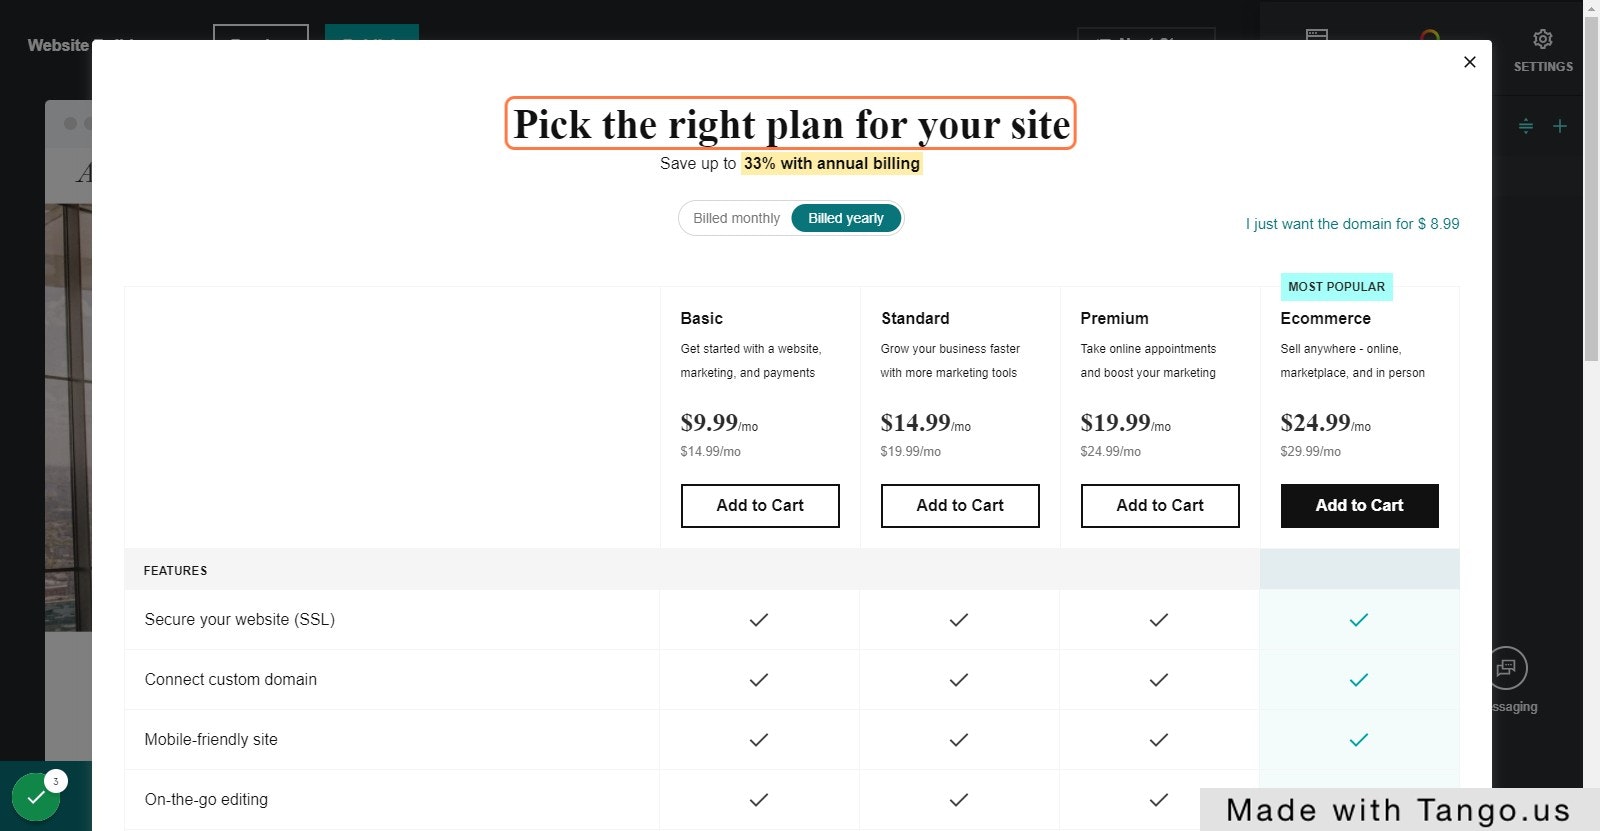 Click on Pick the right plan for your site